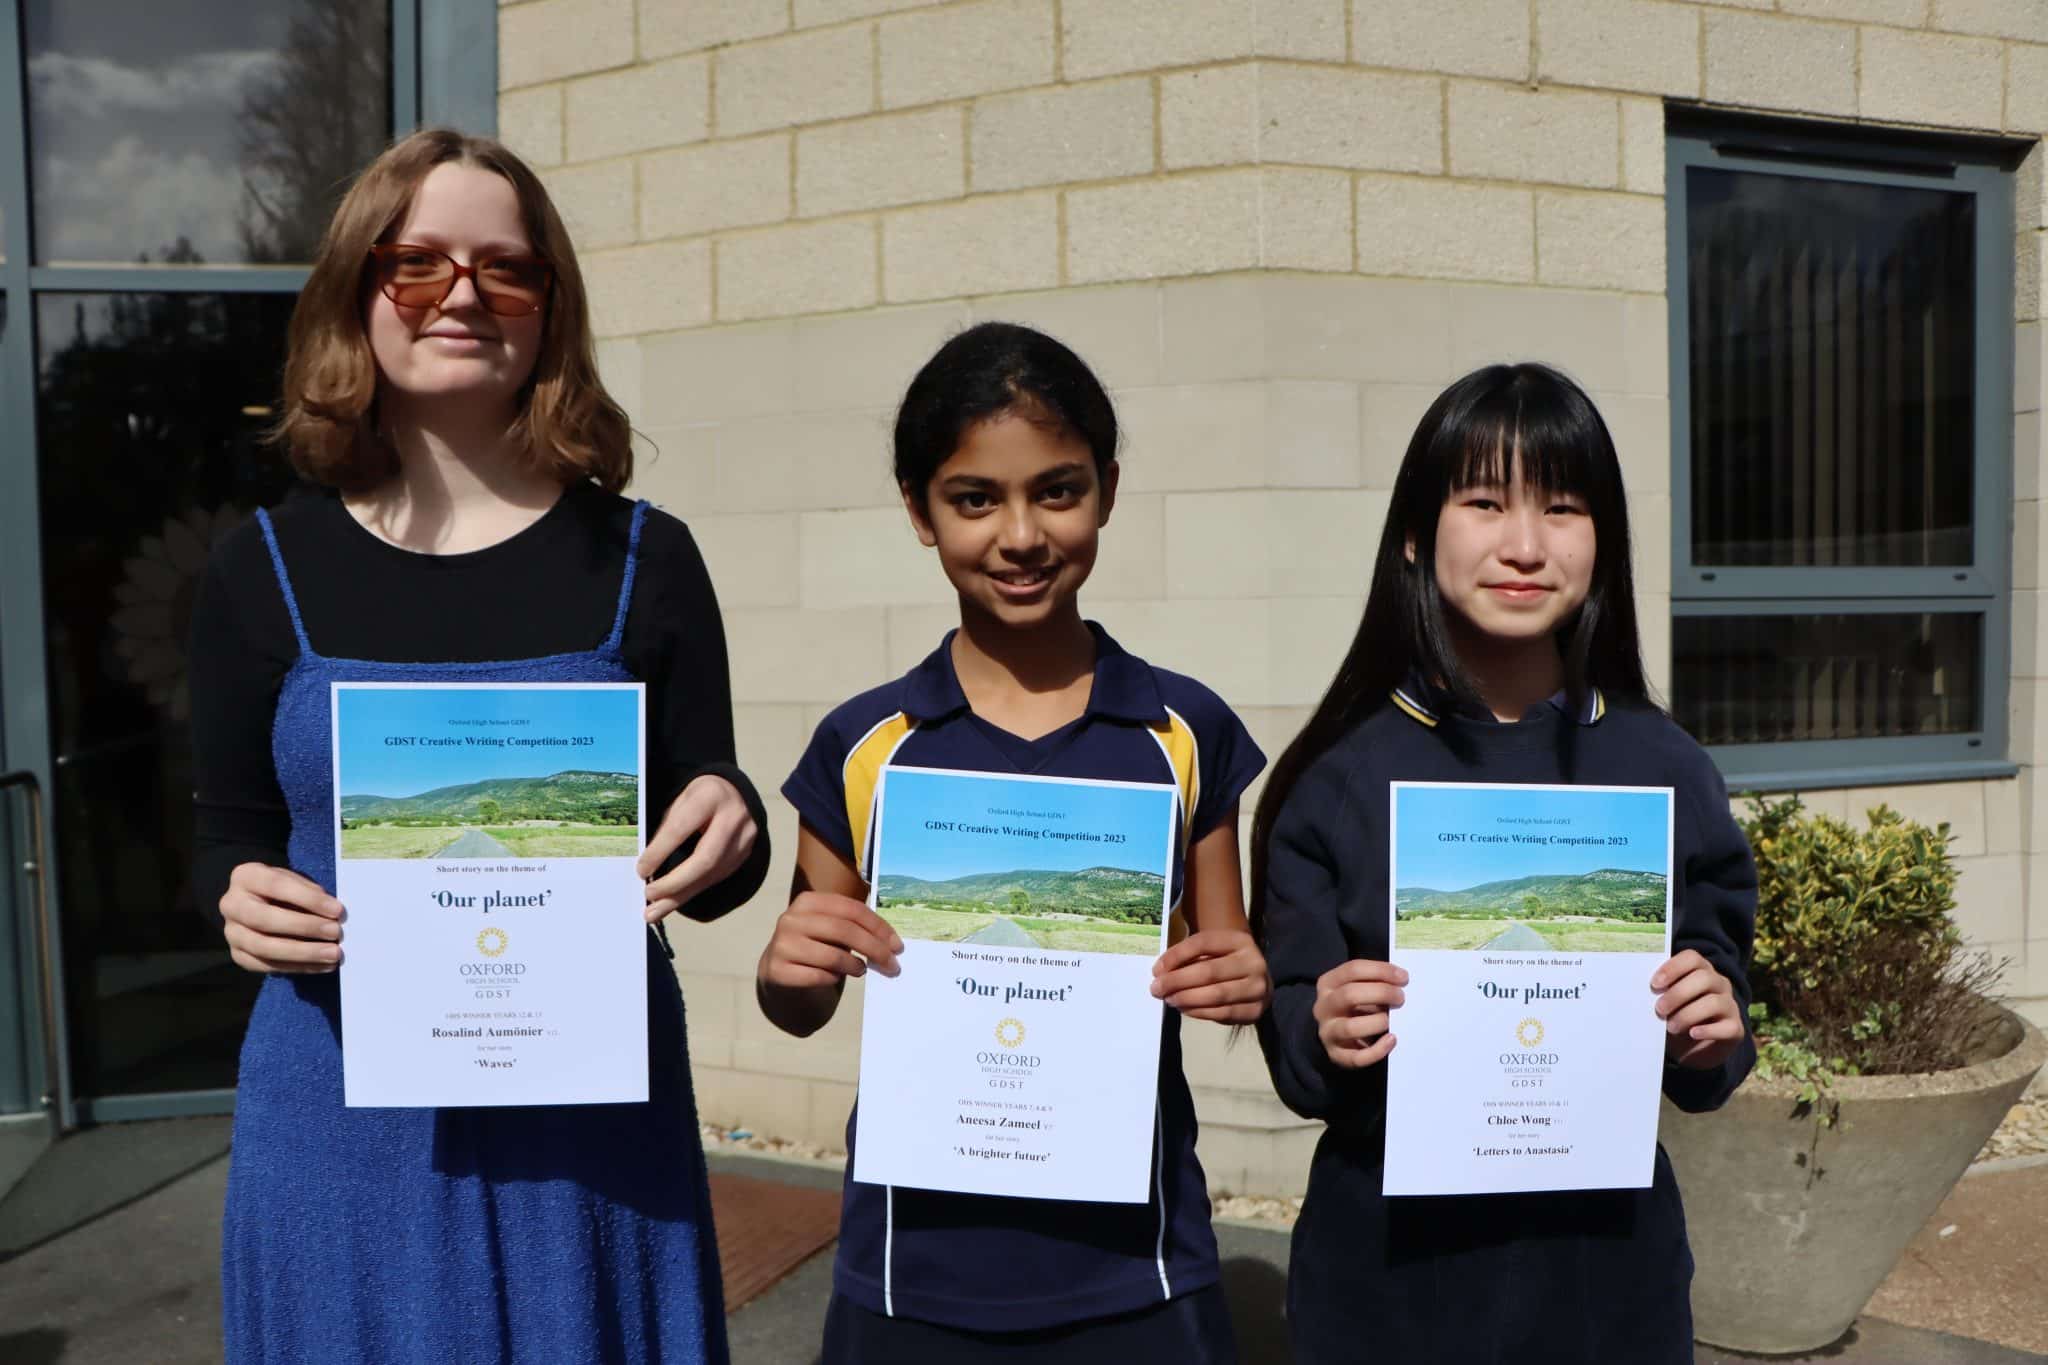 gdst creative writing competition 2023